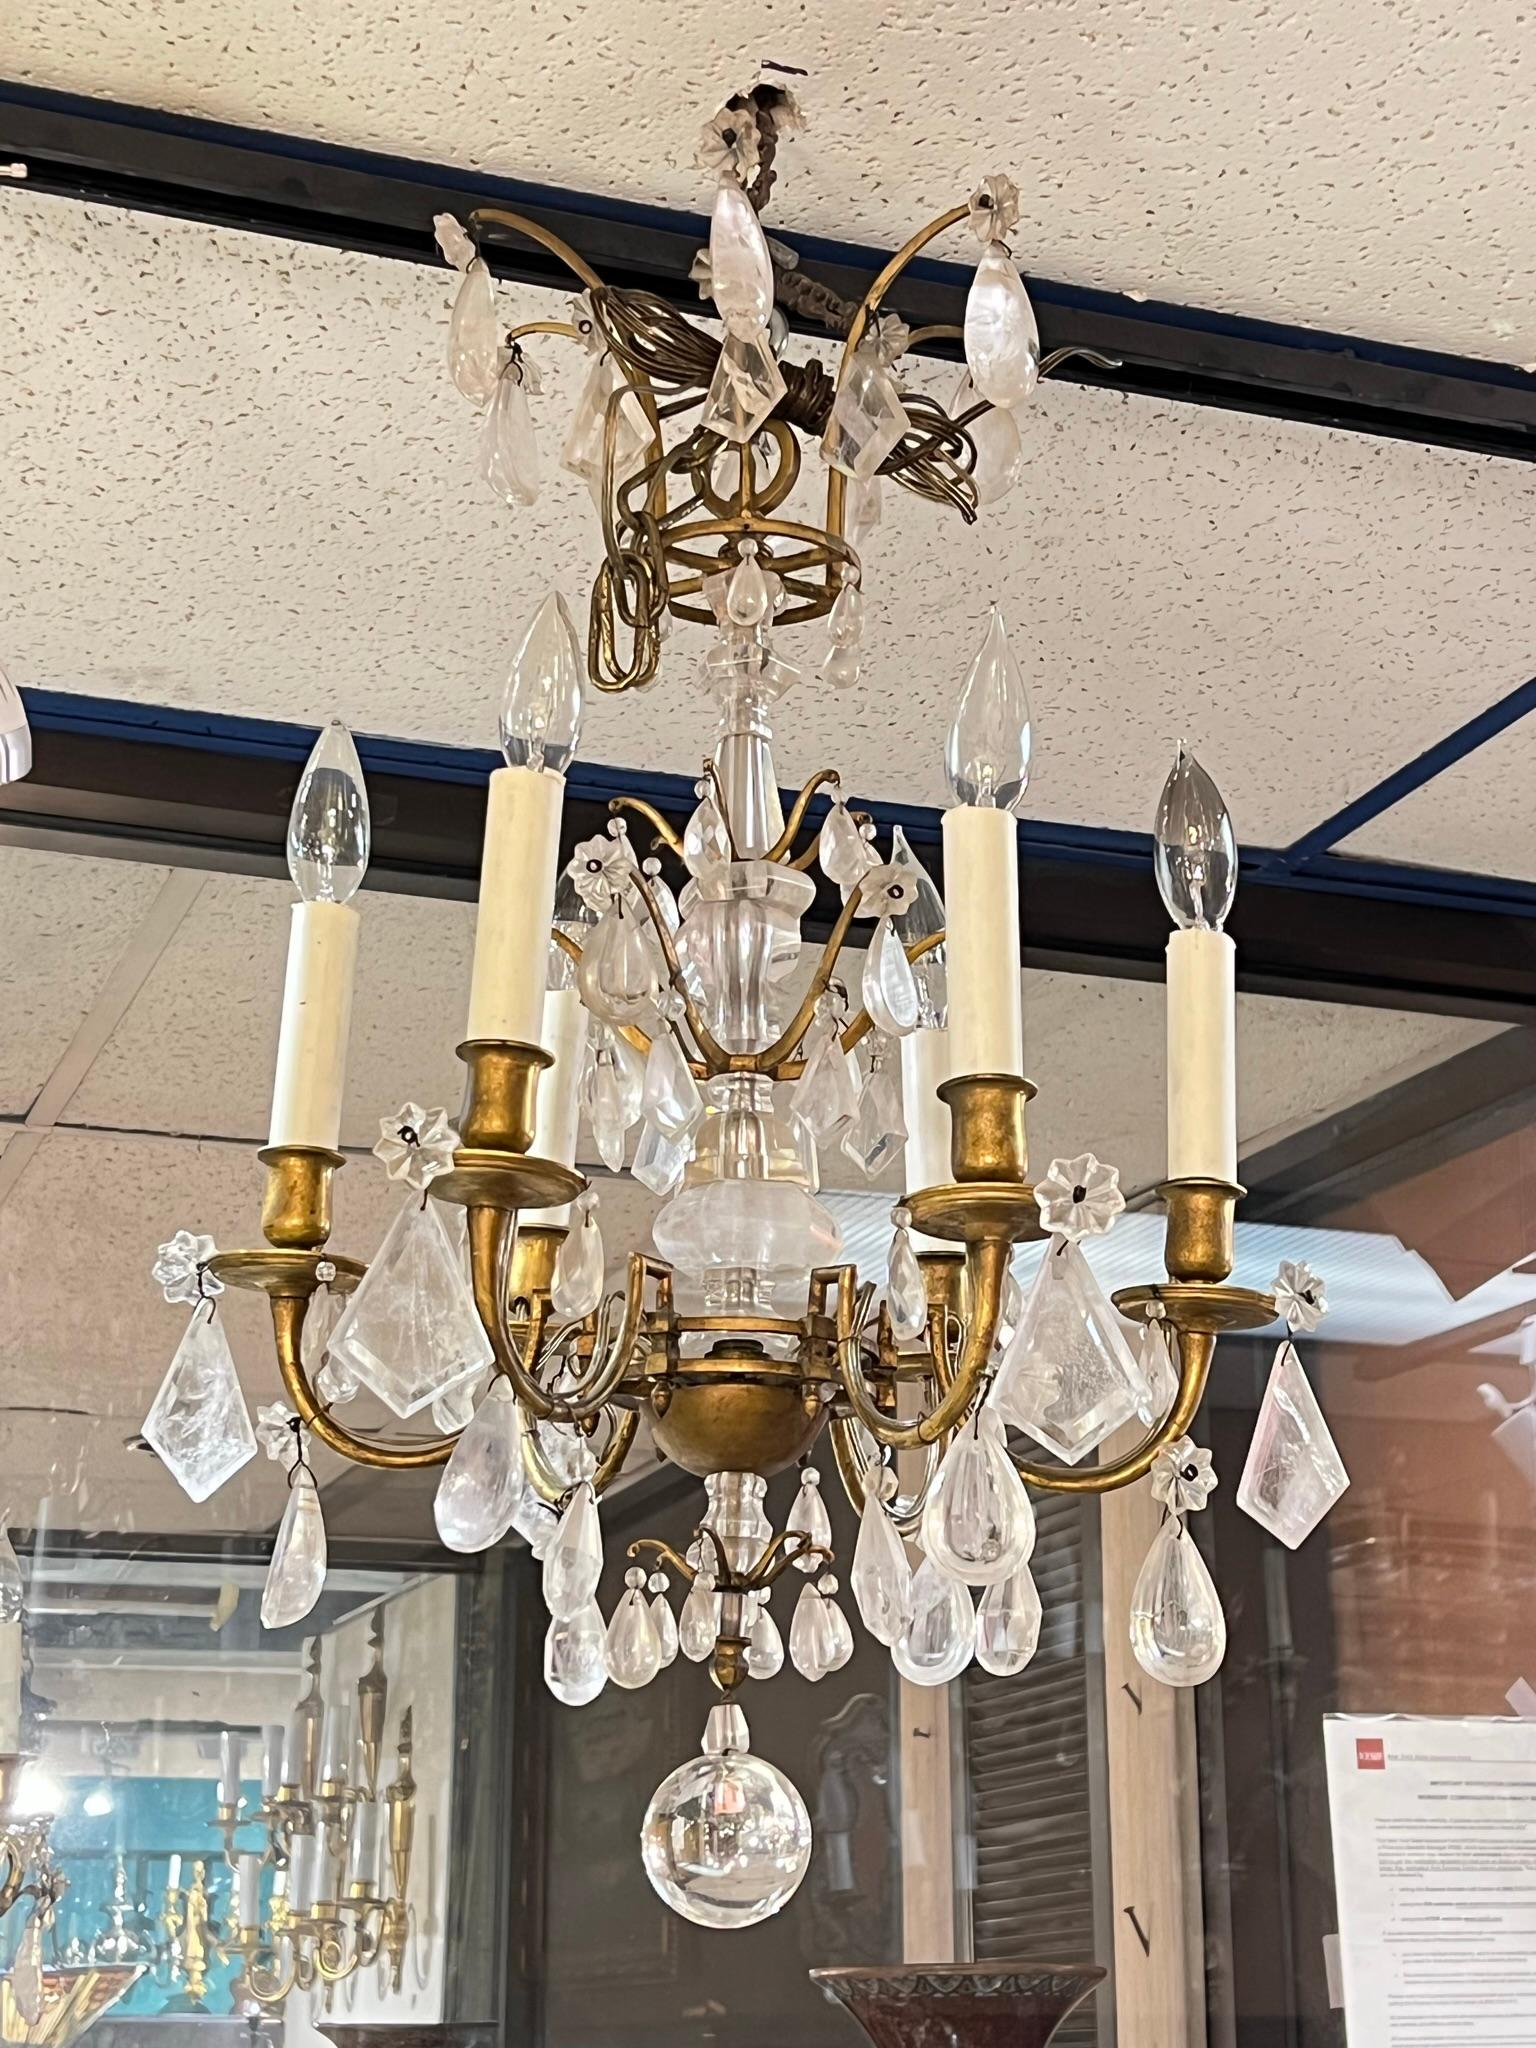 Petite 19 century  French bronze chandelier with rock crystal stem and numerous rock crystal pendants, with six electrified candle arms and modern wiring, ready for use.